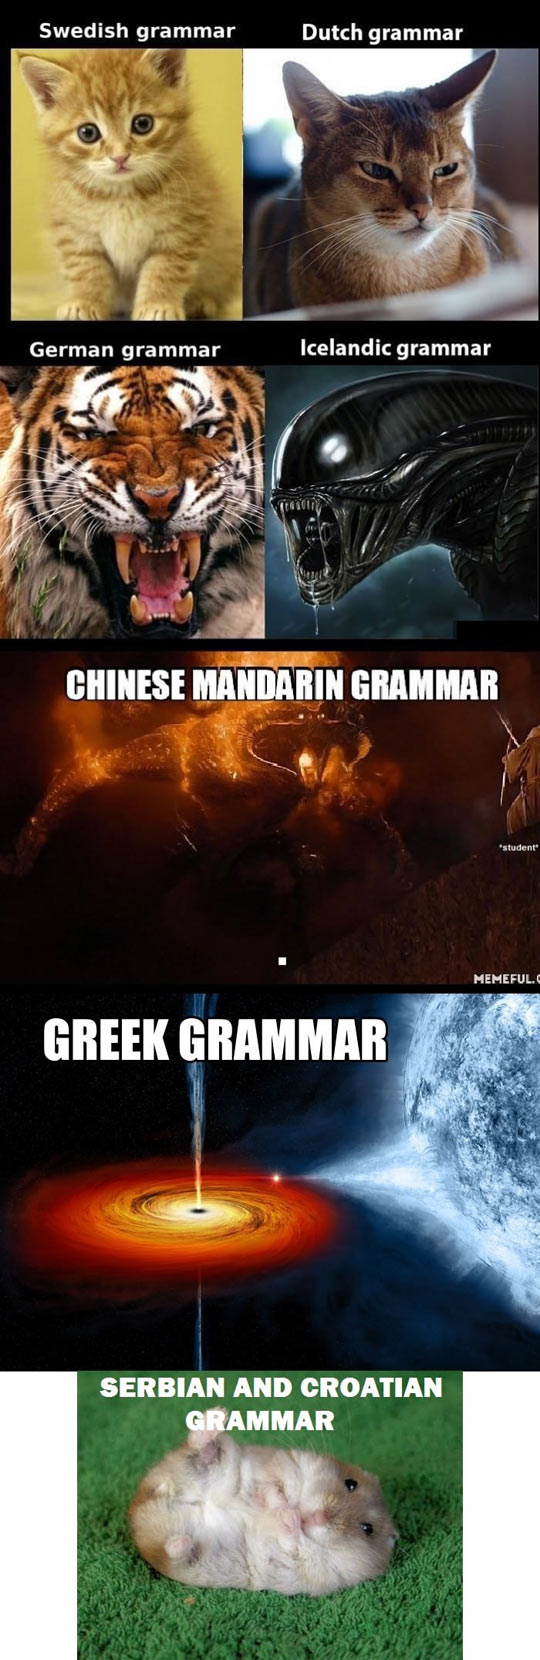 Grammar Difficulty By Language